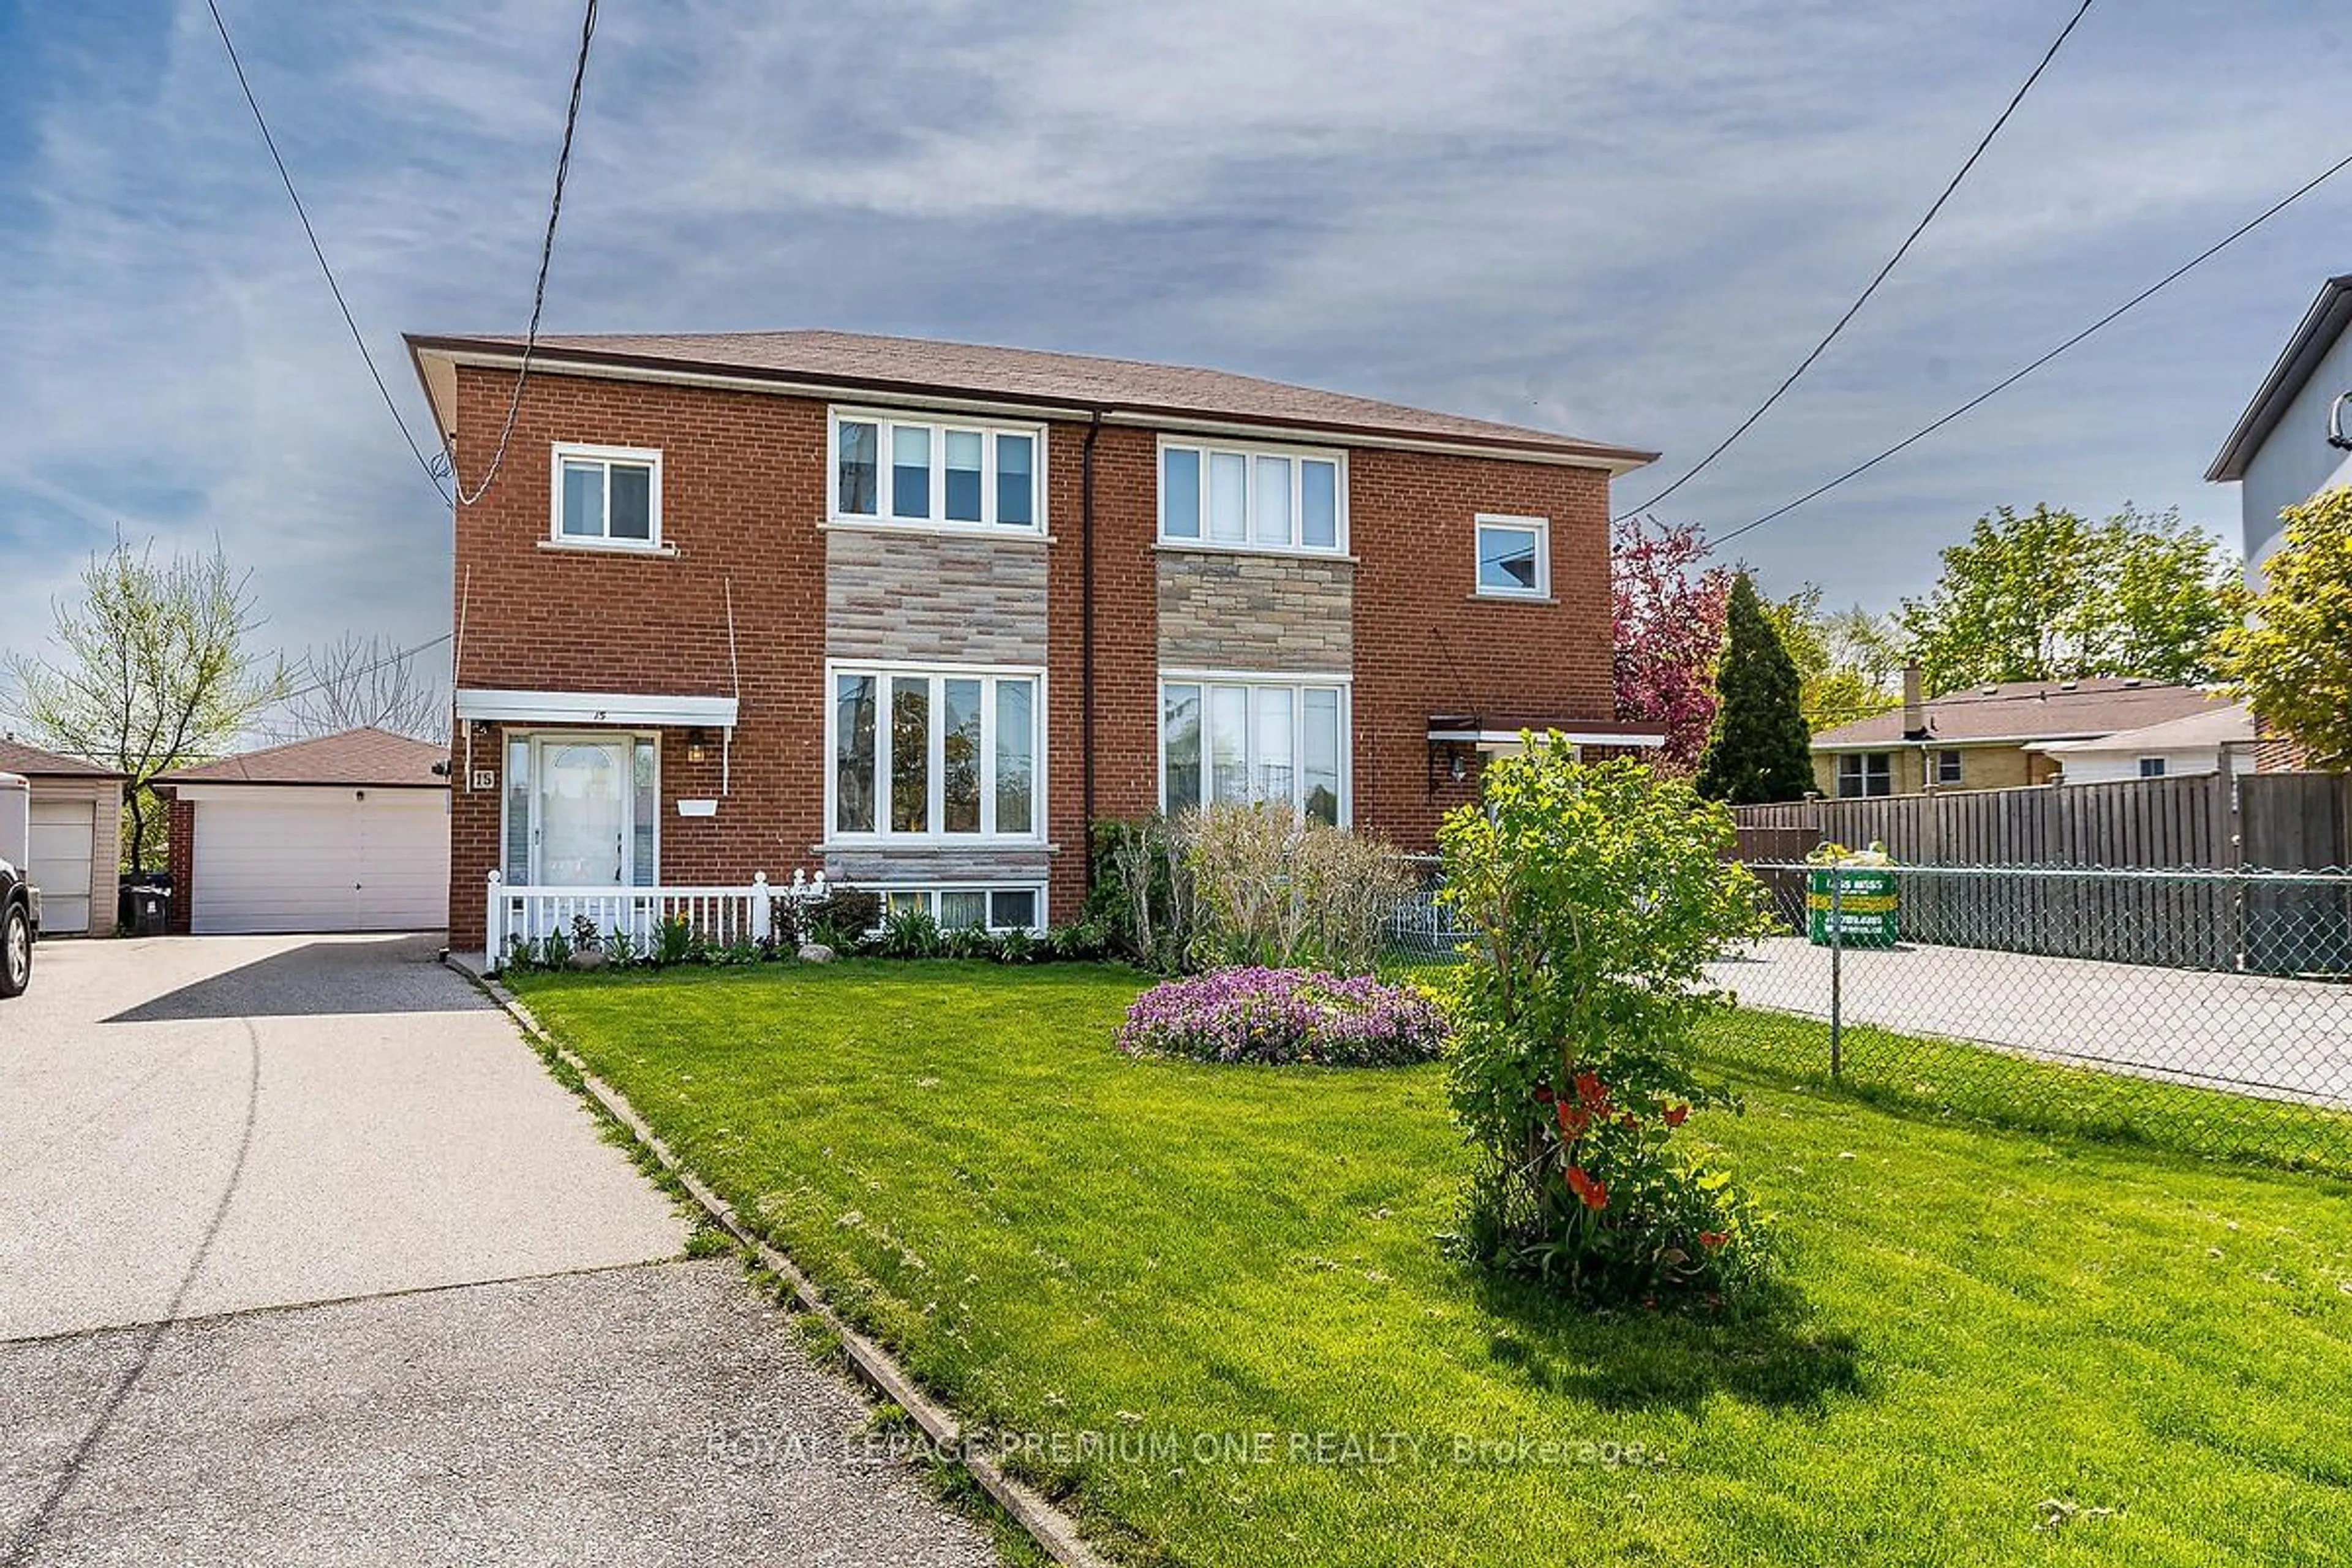 Home with brick exterior material for 15 Talent Cres, Toronto Ontario M9M 2N5